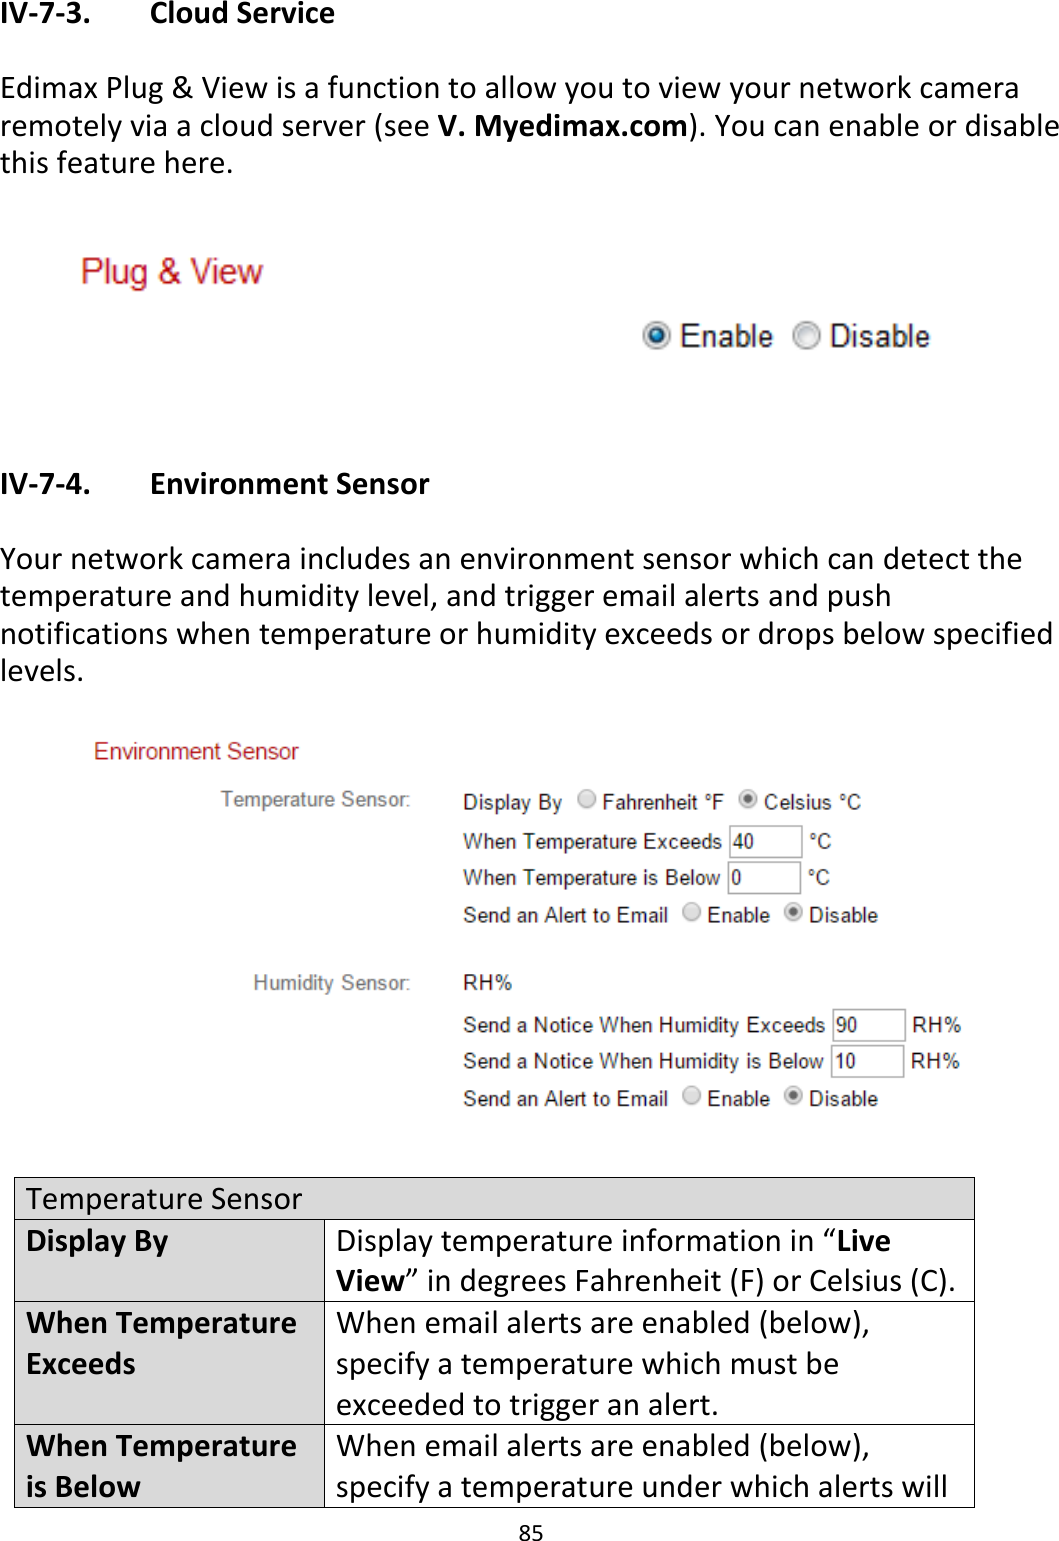 85  IV-7-3.   Cloud Service  Edimax Plug &amp; View is a function to allow you to view your network camera remotely via a cloud server (see V. Myedimax.com). You can enable or disable this feature here.    IV-7-4.   Environment Sensor  Your network camera includes an environment sensor which can detect the temperature and humidity level, and trigger email alerts and push notifications when temperature or humidity exceeds or drops below specified levels.    Temperature Sensor Display By Display temperature information in “Live View” in degrees Fahrenheit (F) or Celsius (C). When Temperature Exceeds When email alerts are enabled (below), specify a temperature which must be exceeded to trigger an alert. When Temperature is Below When email alerts are enabled (below), specify a temperature under which alerts will 